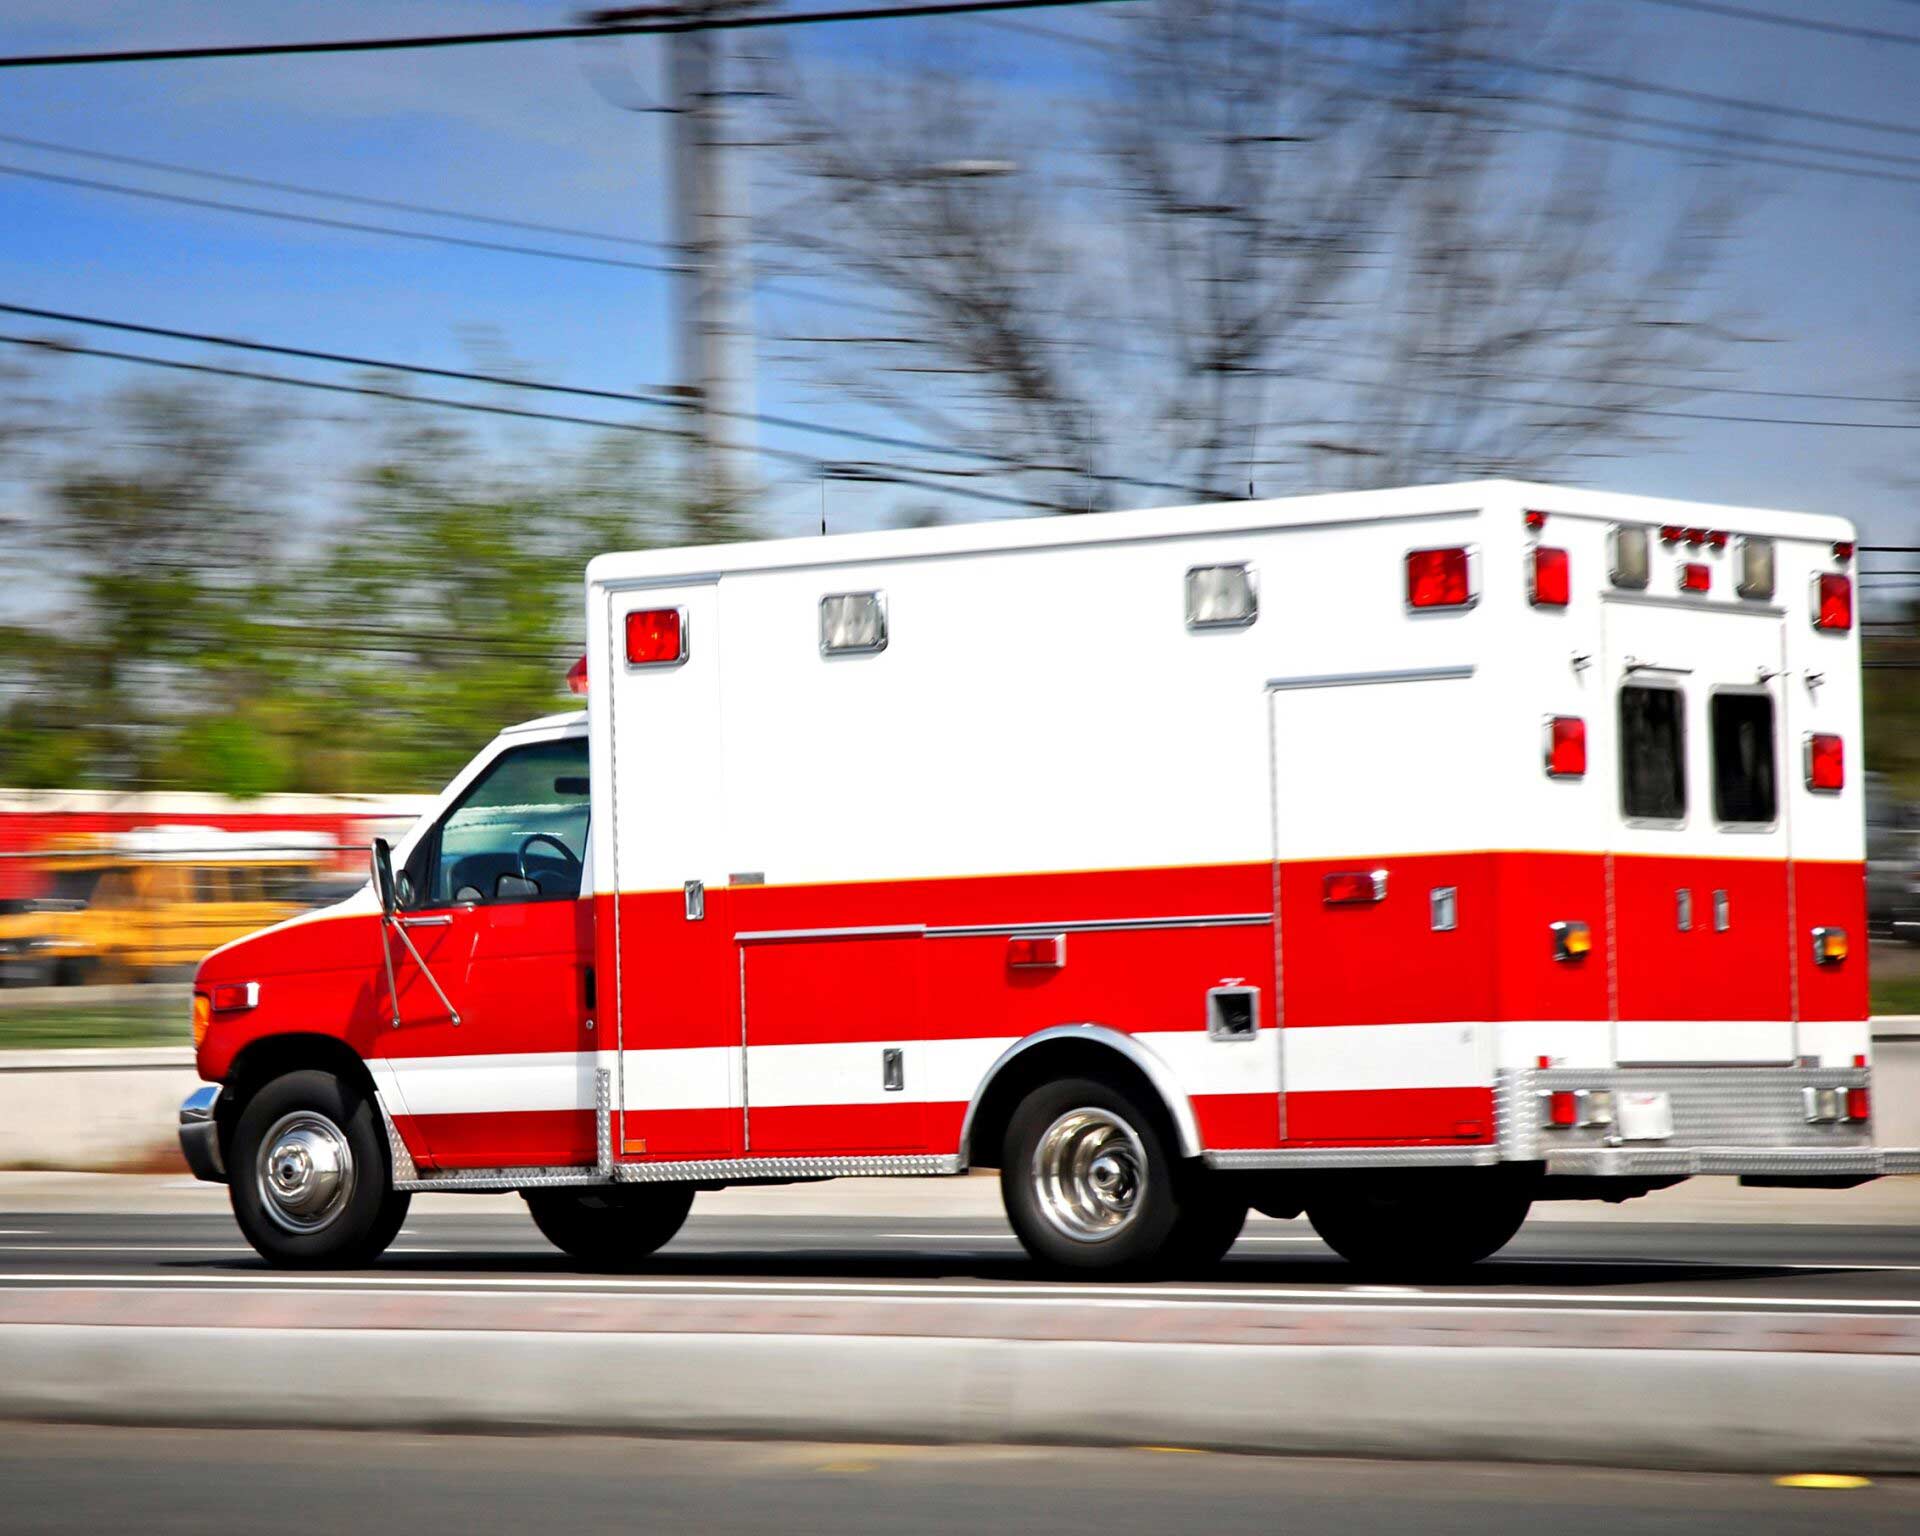 An image taken before needing an emergency vehicle accident attorney in Roseville, CA